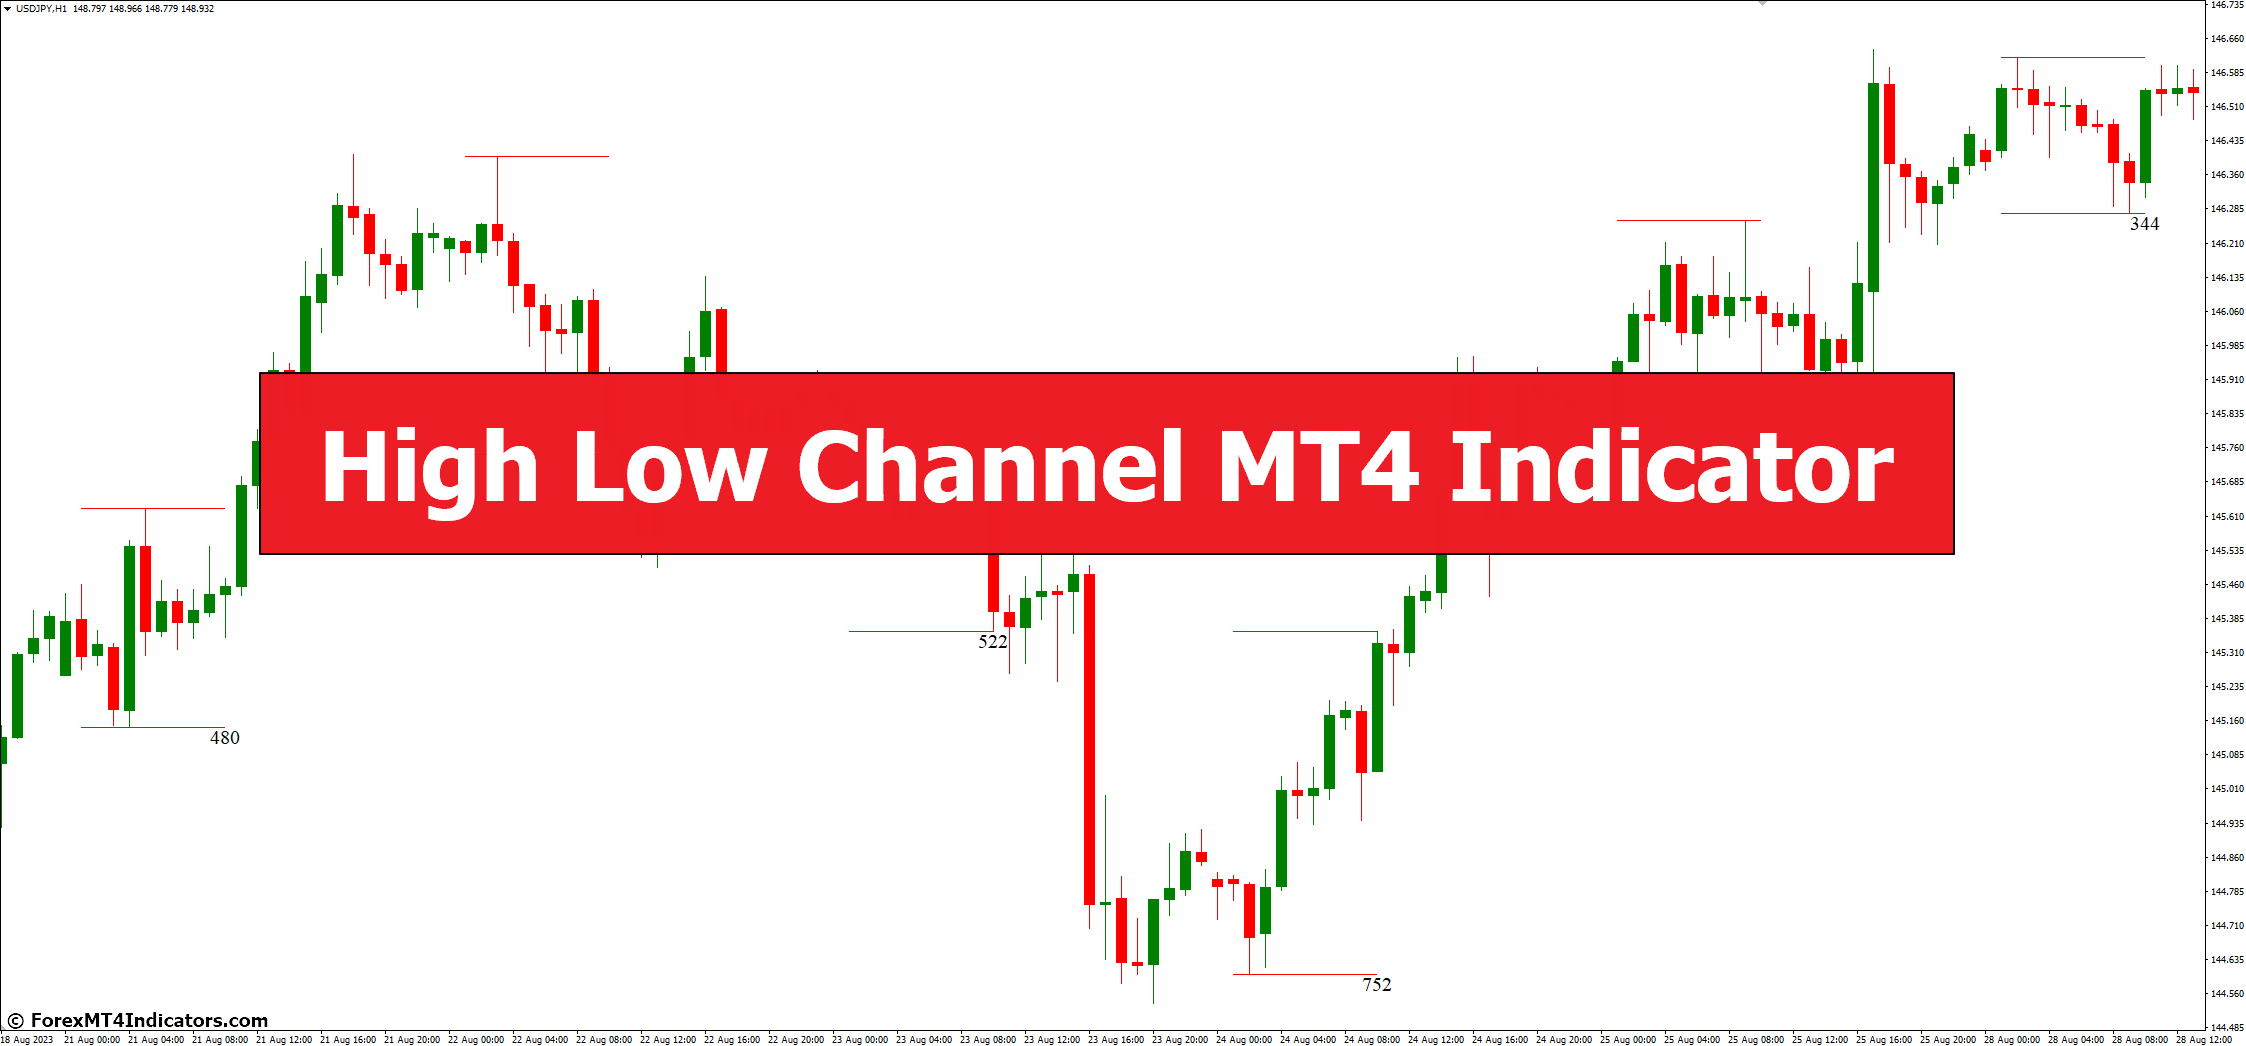 High Low Channel MT4 Indicator